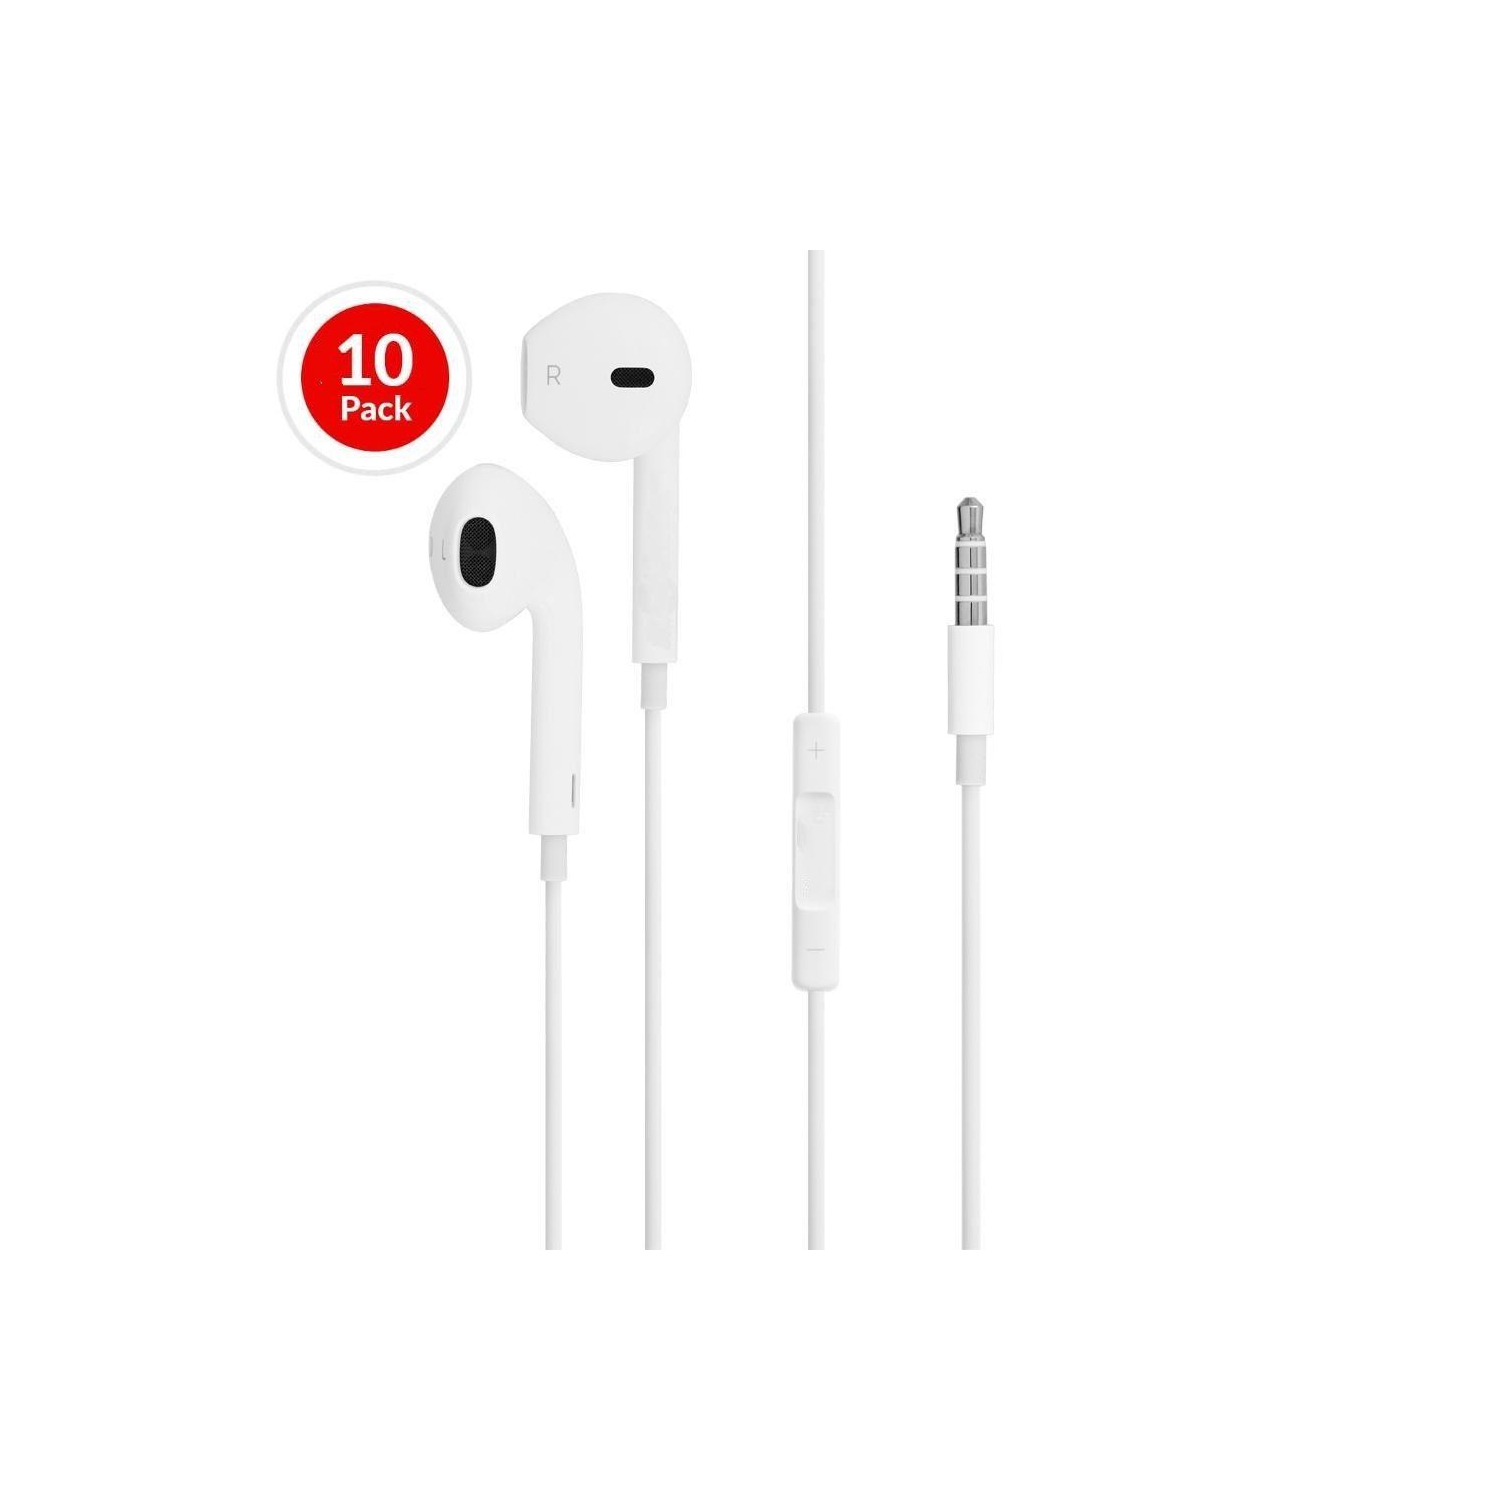 [10 Pack] iPhone Earbuds Headphones Earphones with 3.5mm Wired in Ear Headphone Plug, Built-in Microphone & Volume Cont